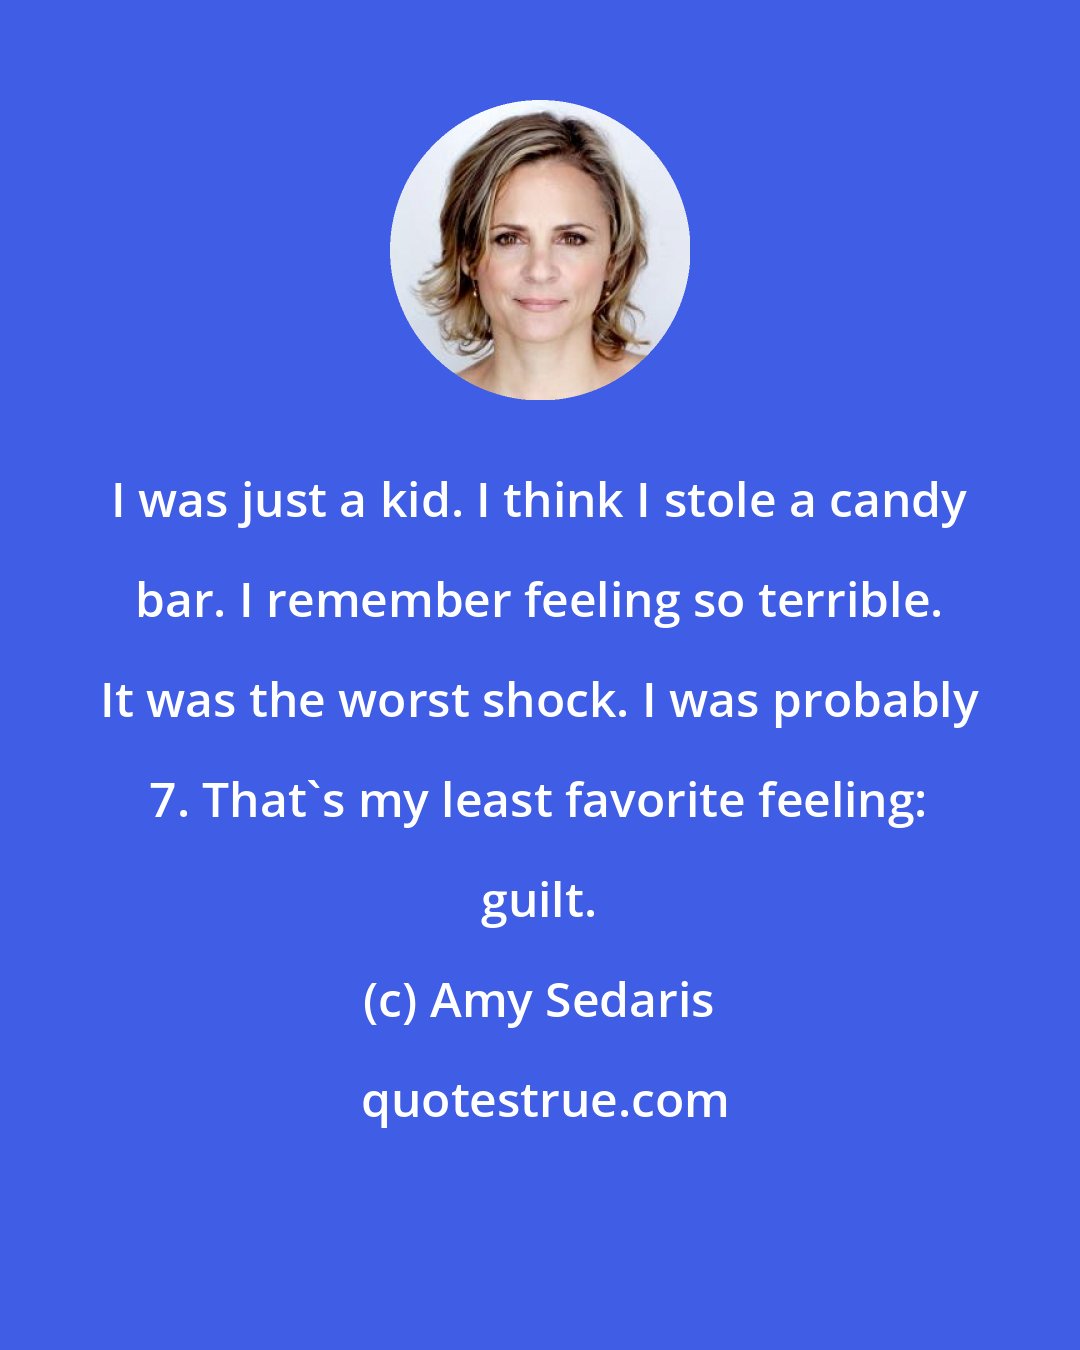 Amy Sedaris: I was just a kid. I think I stole a candy bar. I remember feeling so terrible. It was the worst shock. I was probably 7. That's my least favorite feeling: guilt.